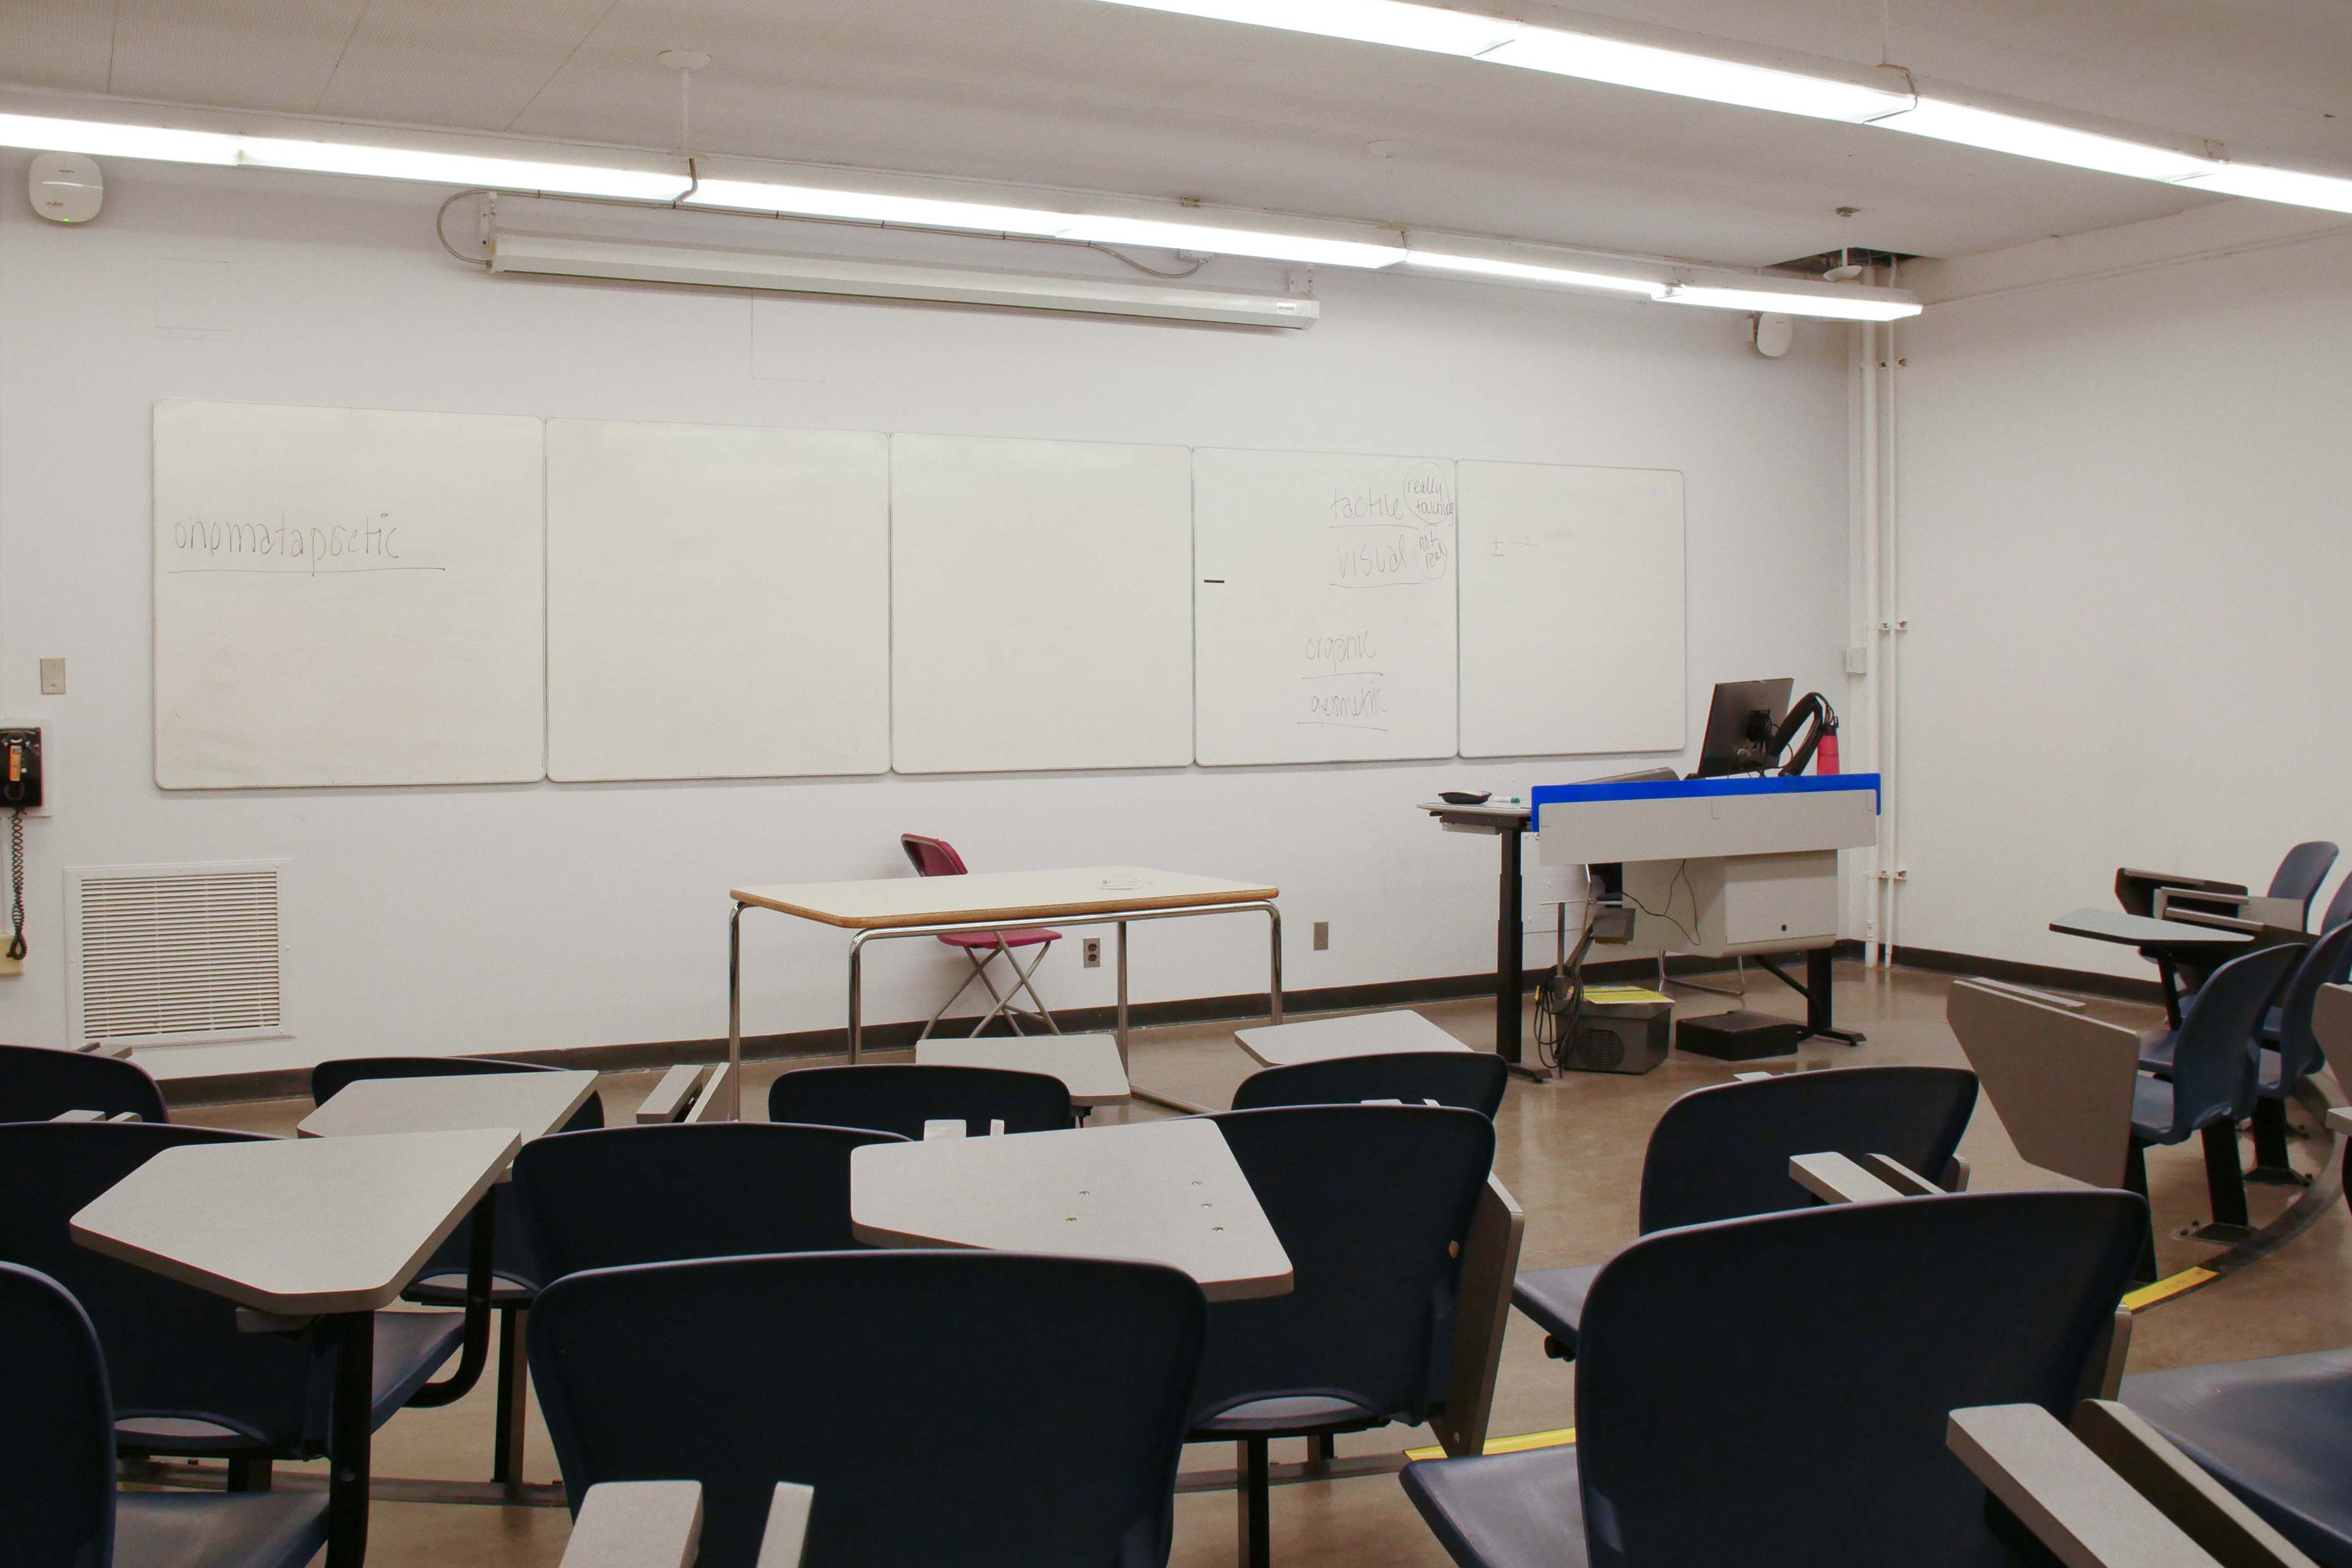 Student view of classroom in Kerr Hall following renovations